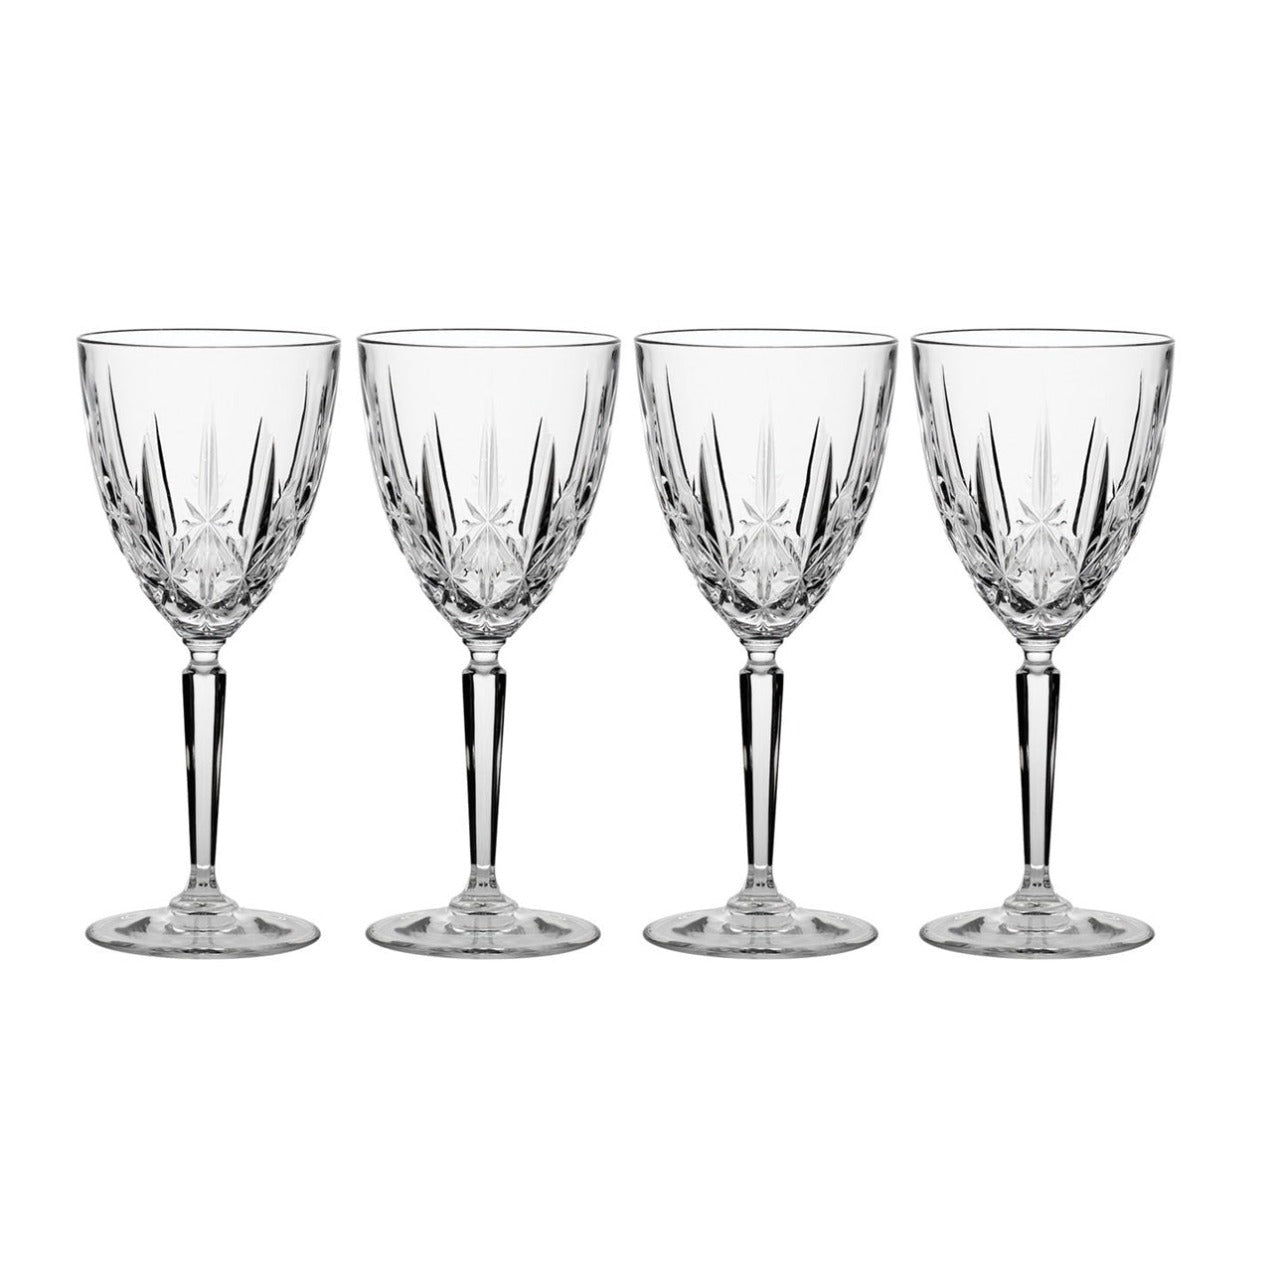 Waterford Marquis Sparkle Wine Glass Set of 4  Brisk and modern, the Sparkle pattern by Waterford is characterized by brilliant crystal cuts reminscent of delicate starlight. Ideal for serving both red and white grape varieties, these versatile Wine glasses feature the comforting weight and clarity of Waterford fine crystal.